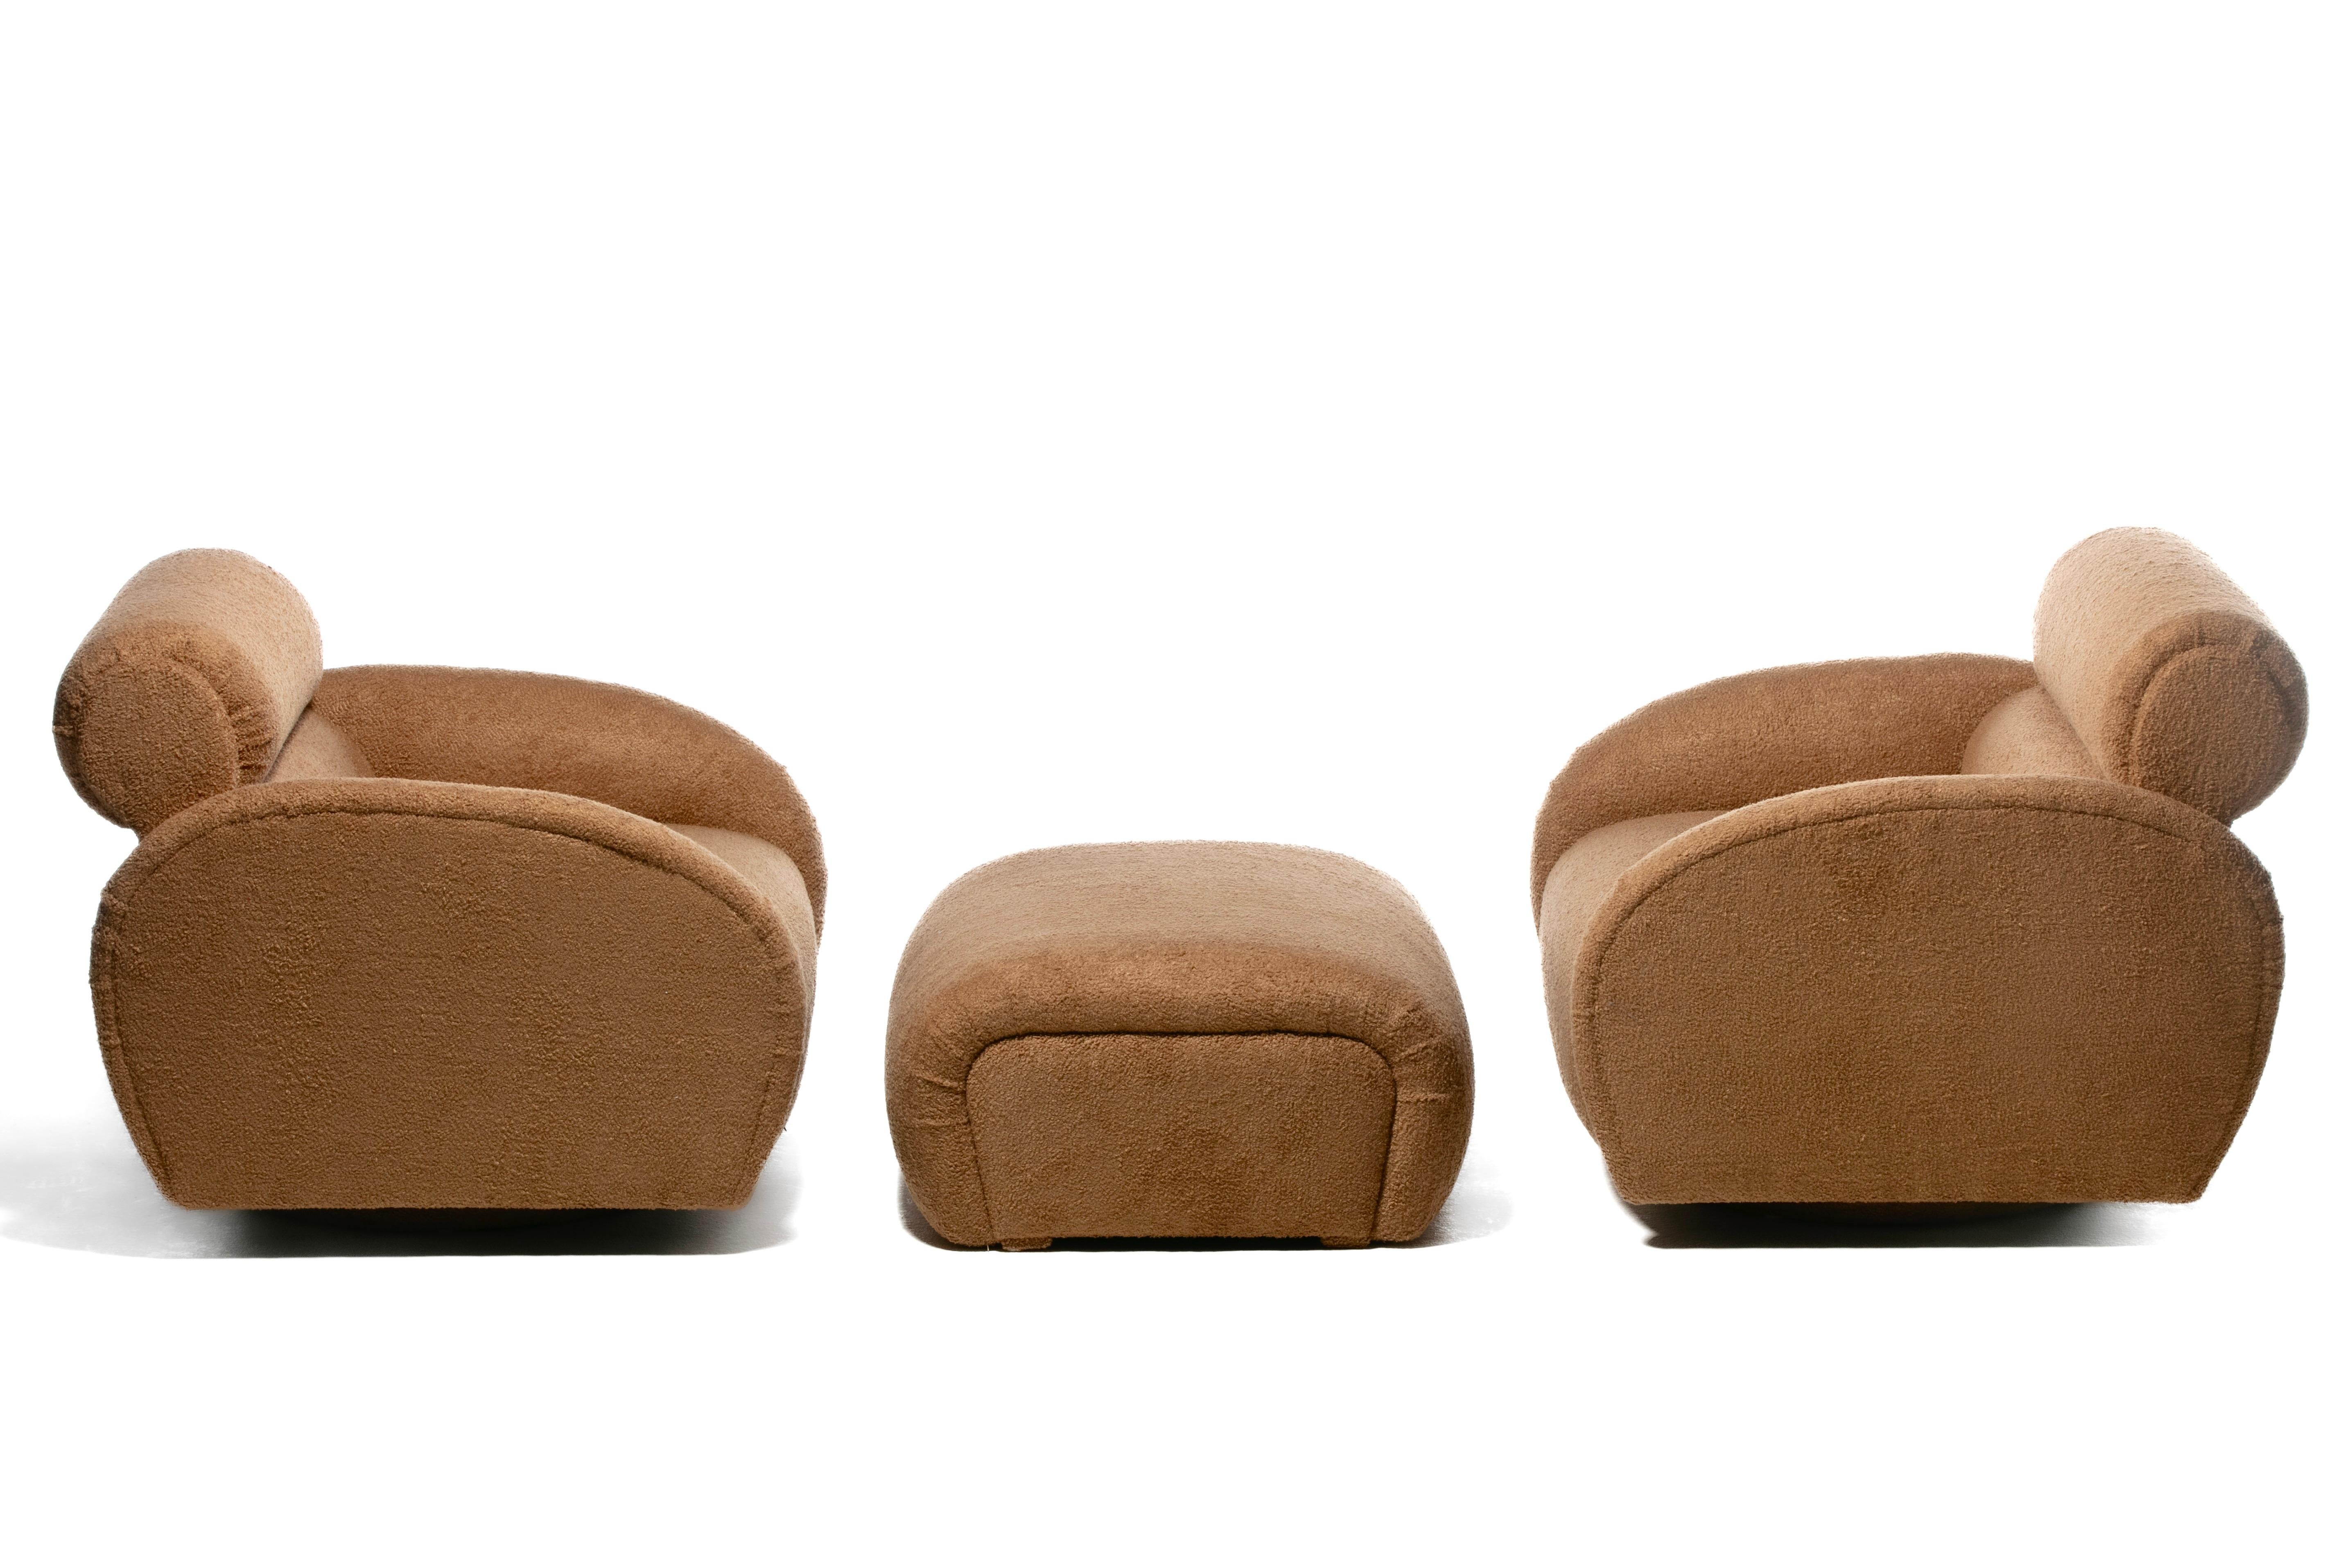 Late 20th Century Large Scale Directional Post Modern Swivel Chairs & Ottoman in Mocha Fabric For Sale